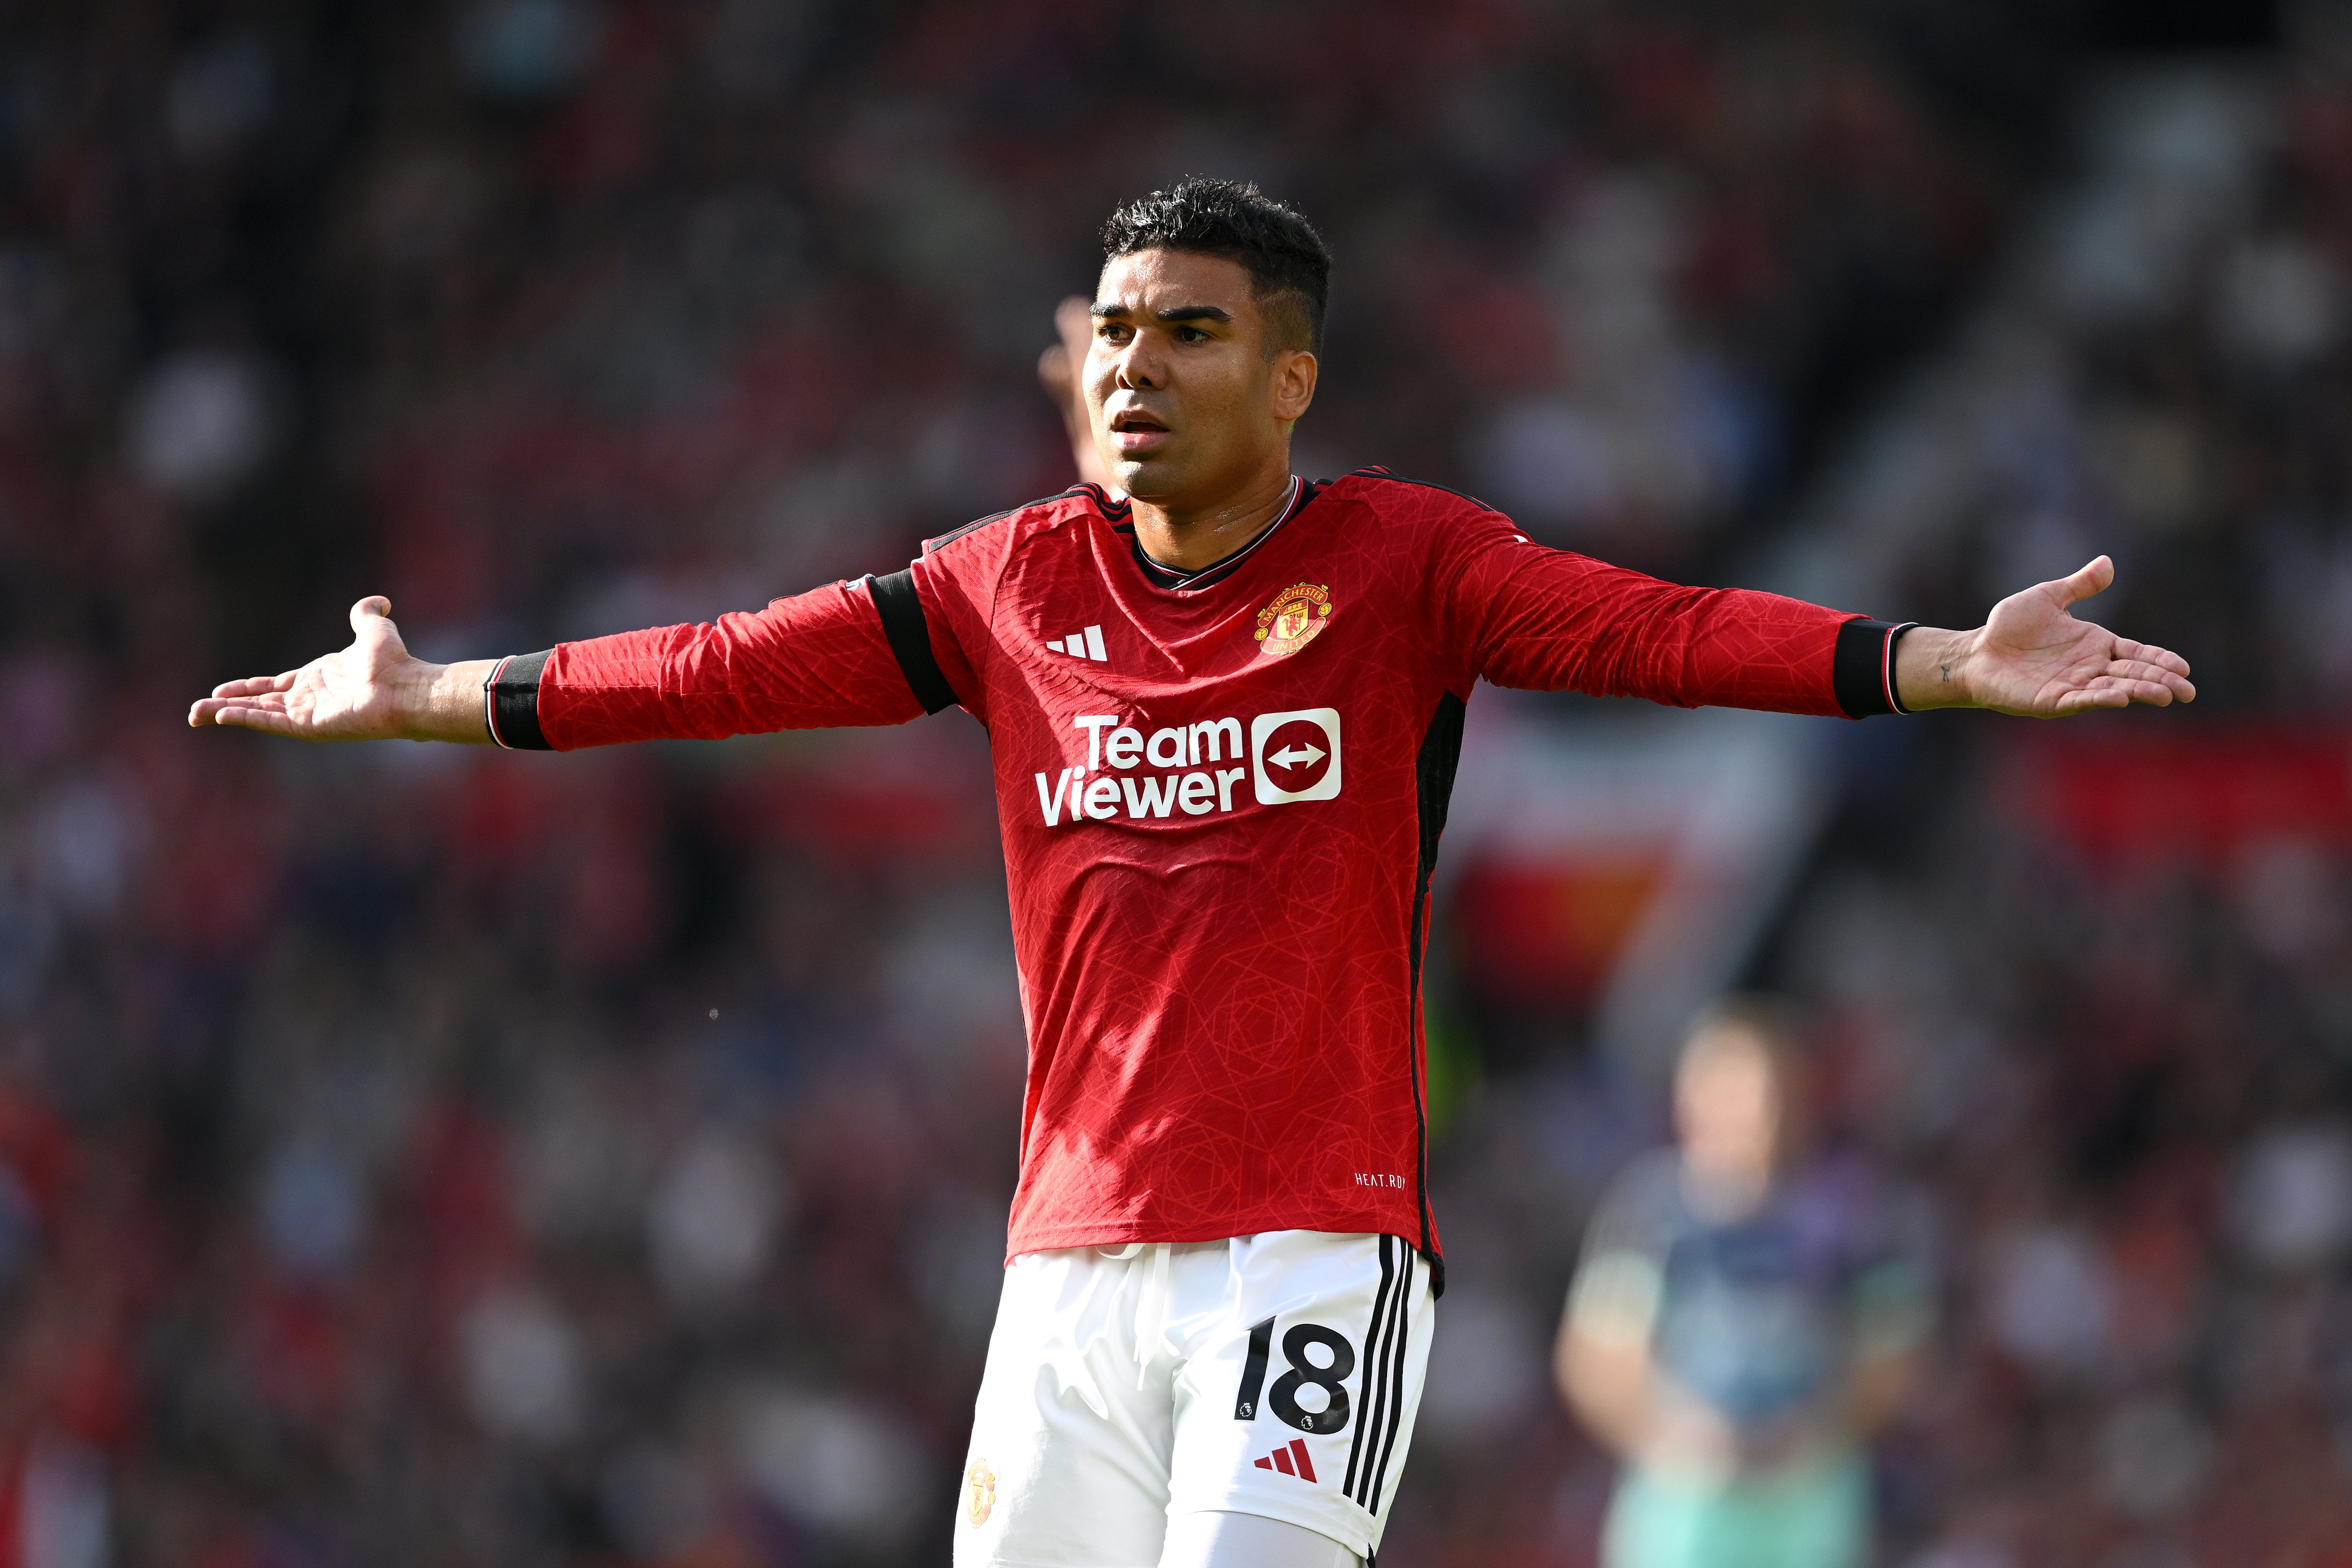 Casemiro’s early substitution indicative of Manchester United’s problems